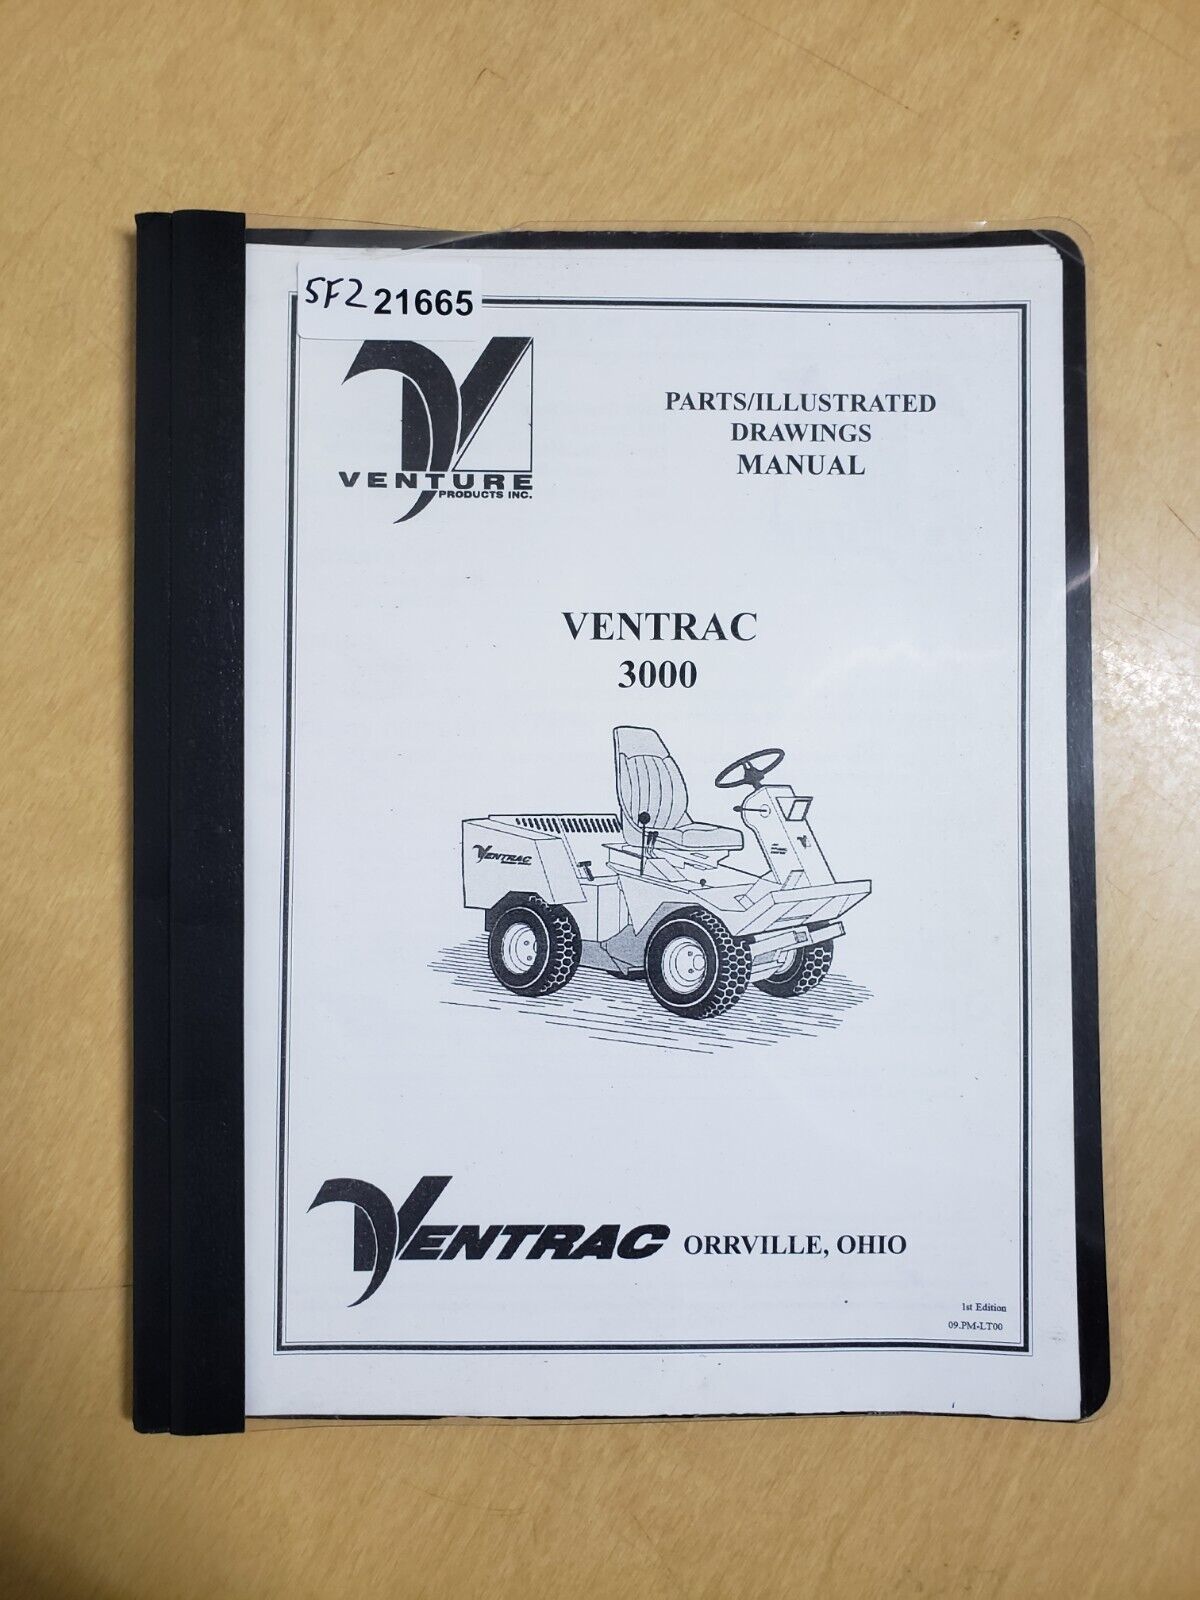 Ventrac 3000 Tractor Parts List Illustrated Drawings Manual